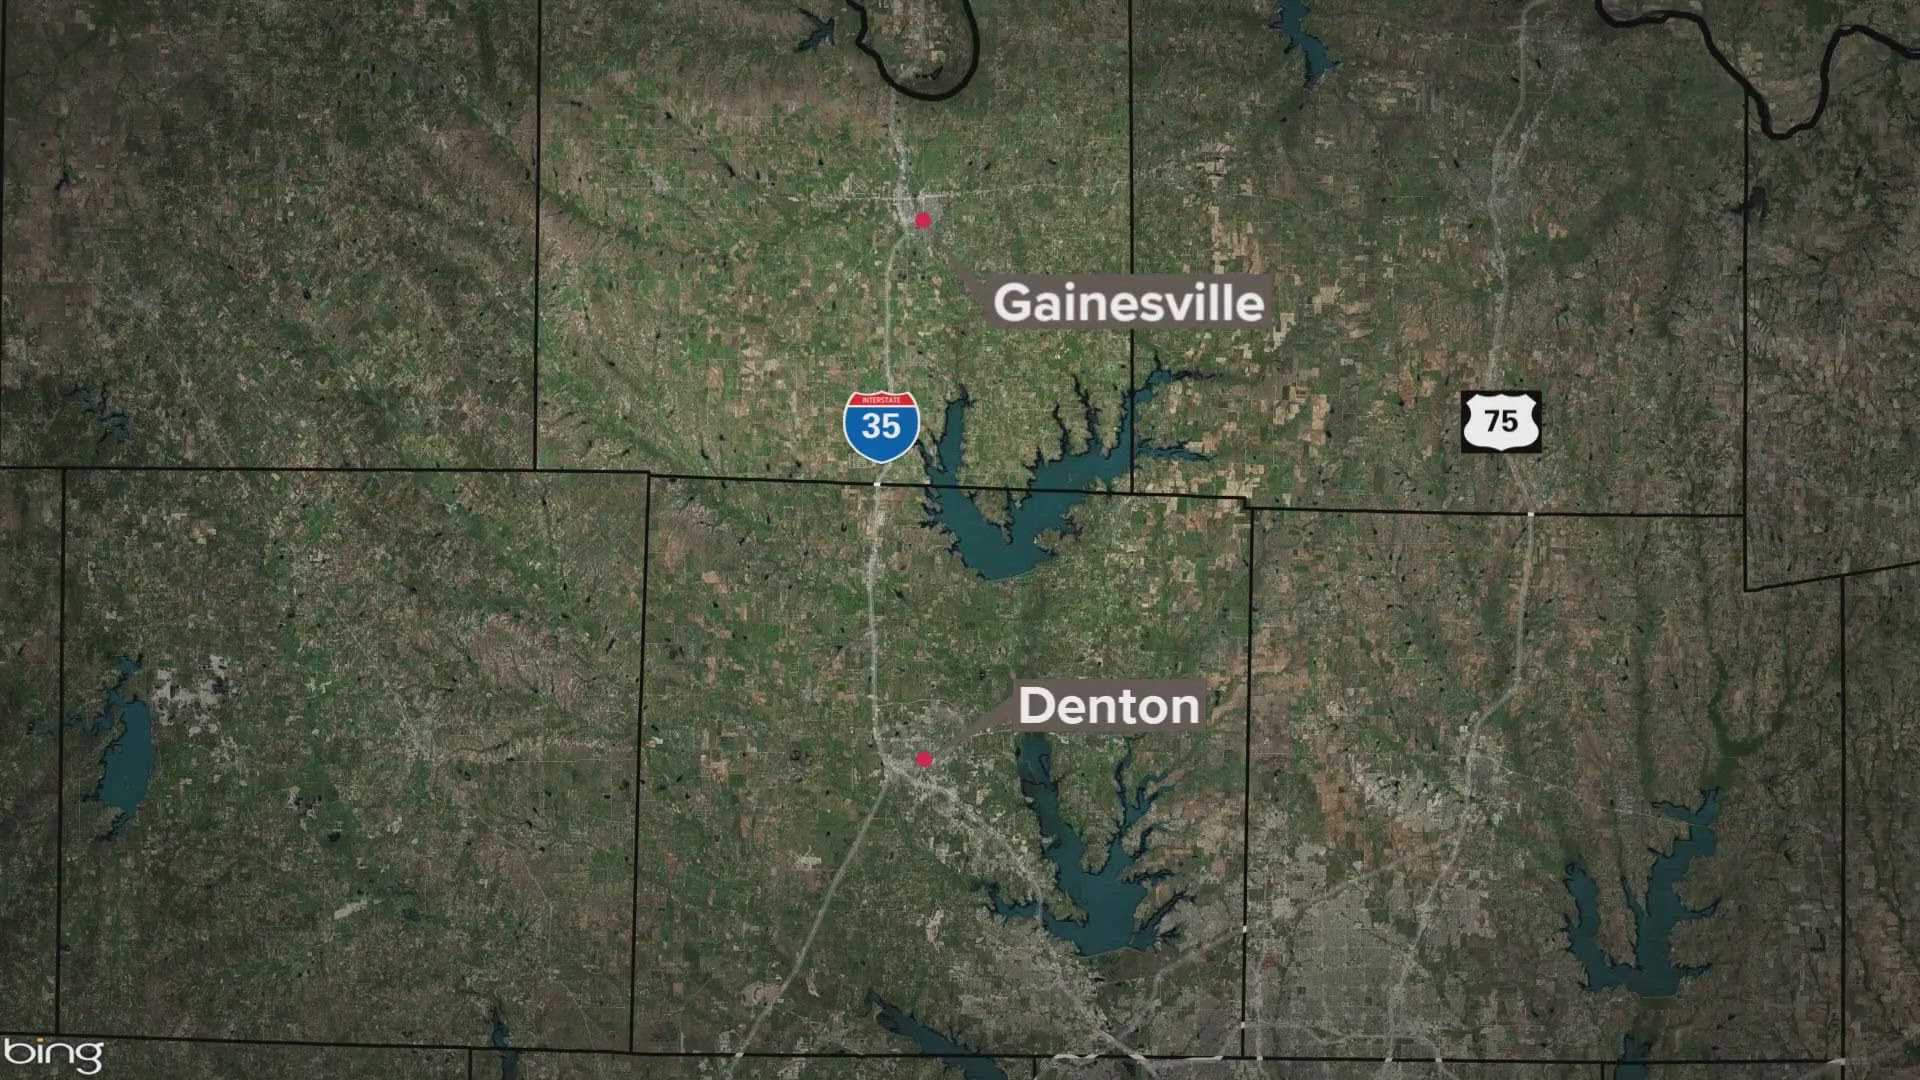 The plane crashed during an instructional flight after departing from Denton Enterprise Airport, according to the NTSB and FAA.